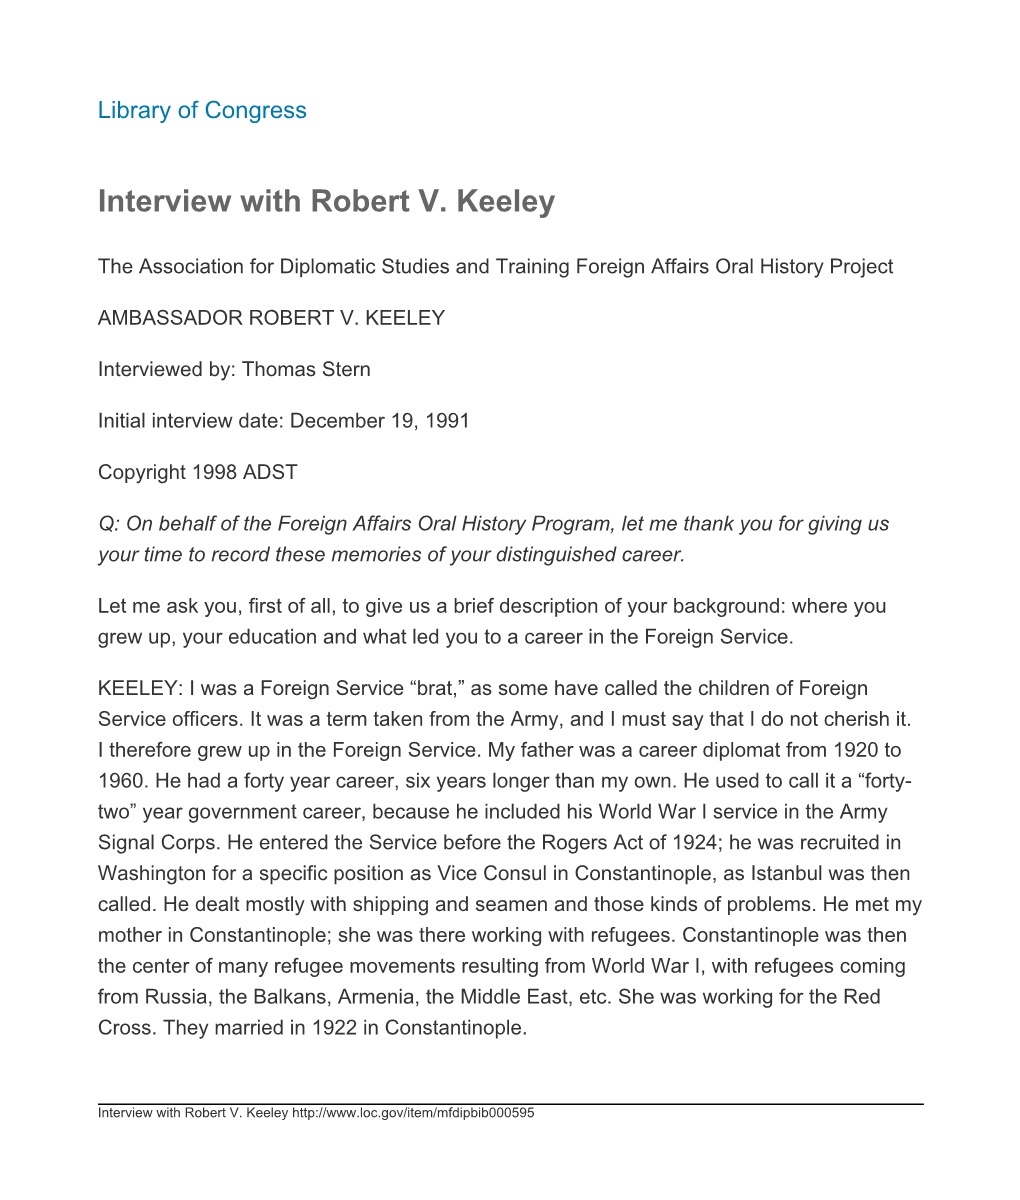 Interview with Robert V. Keeley